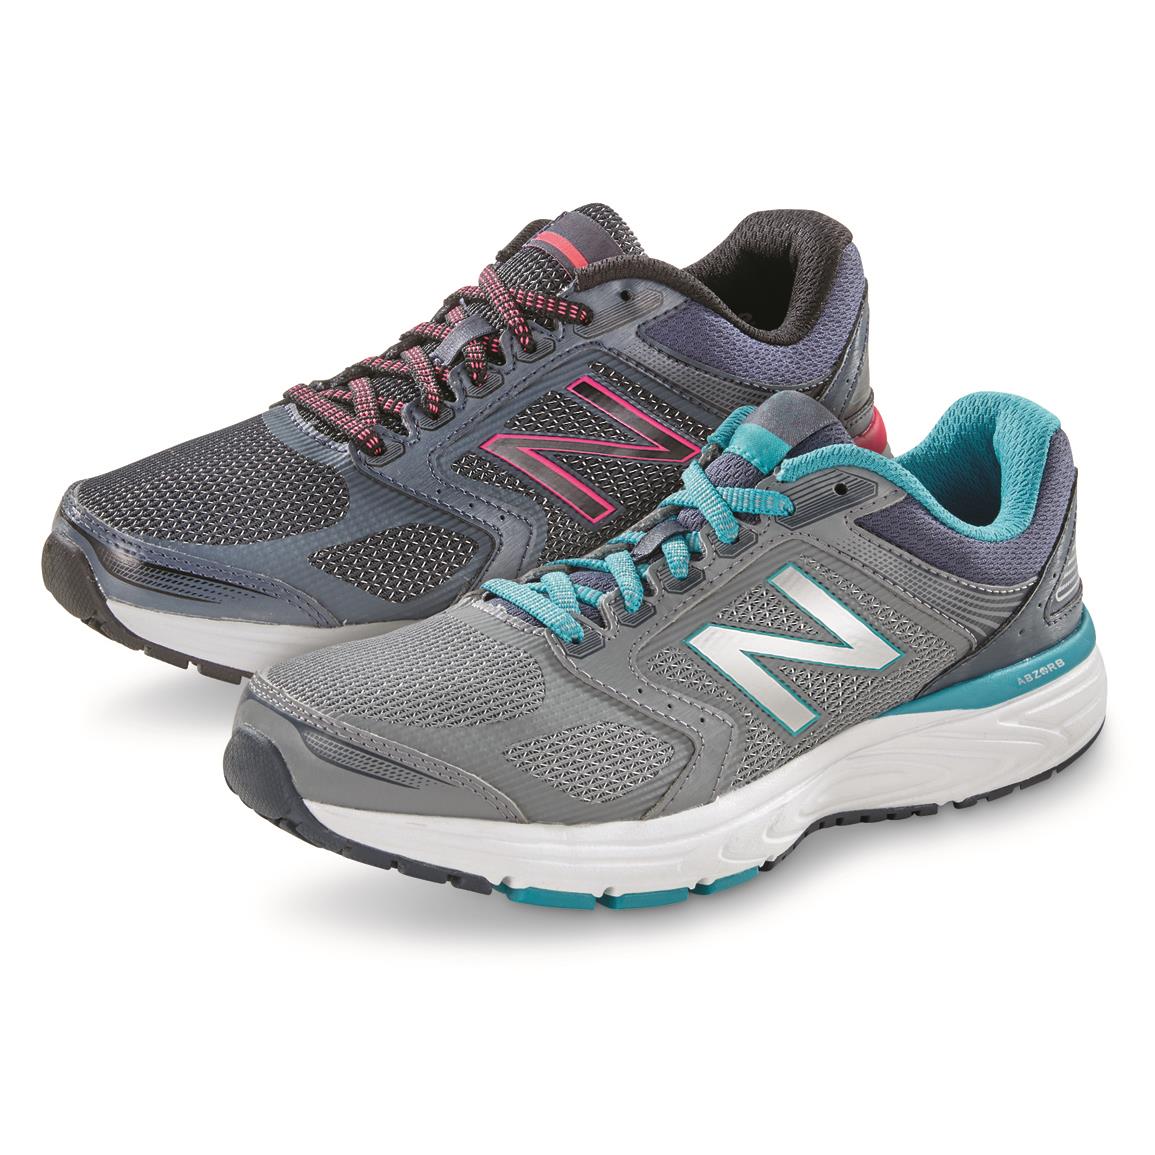 New Balance 560 Womens Top Sellers, UP TO 54% OFF